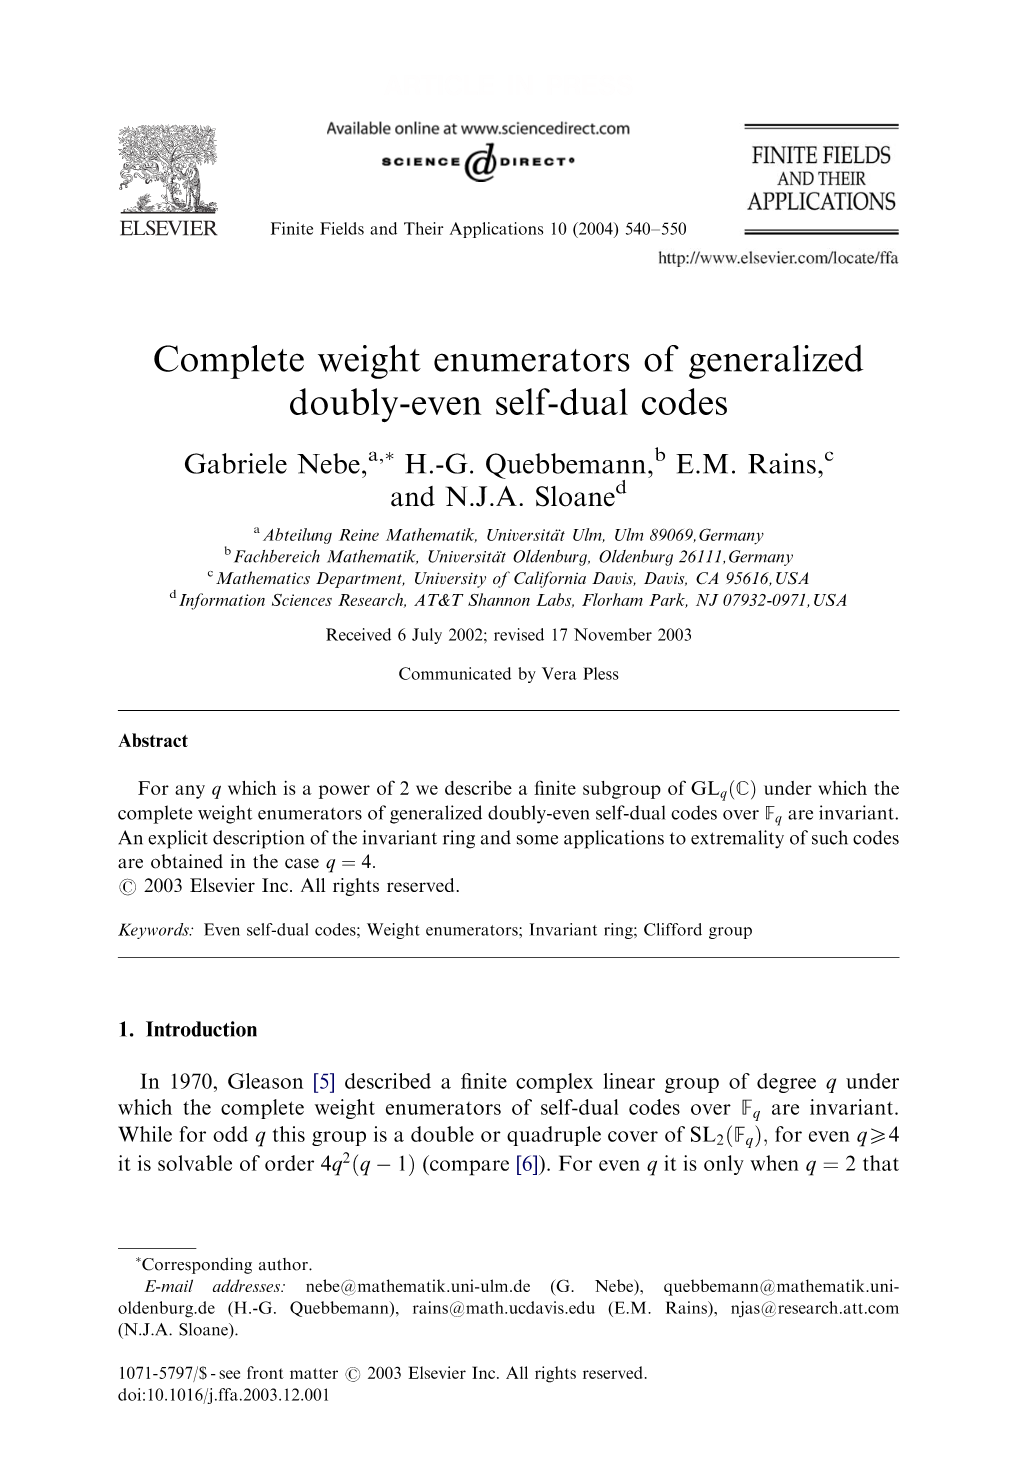 Complete Weight Enumerators of Generalized Doubly-Even Self-Dual Codes